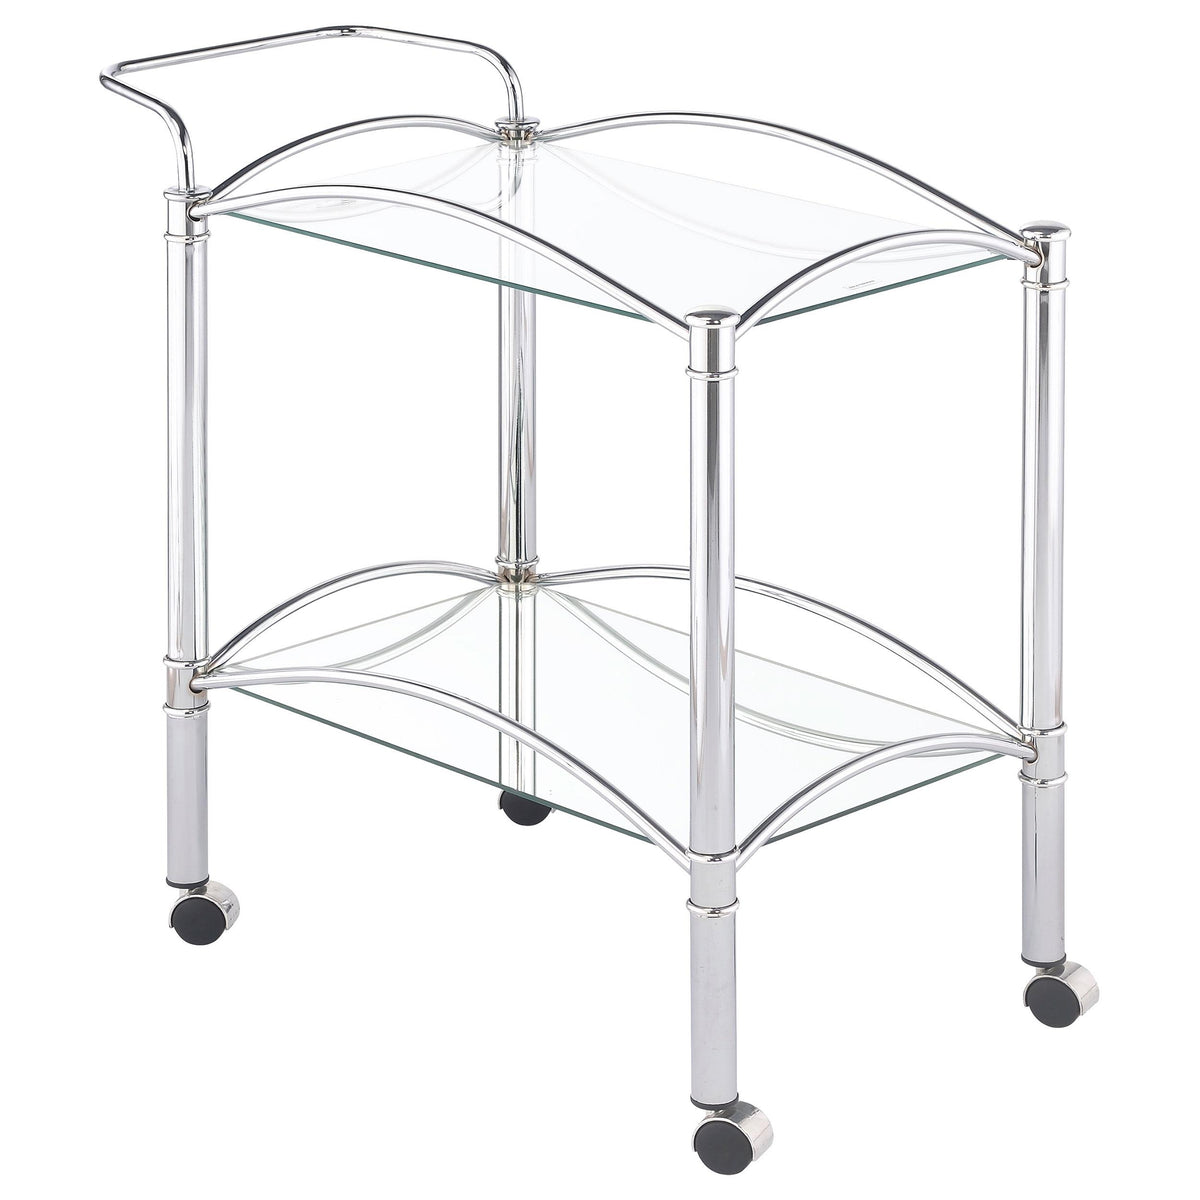 Shadix 2-tier Serving Cart with Glass Top Chrome and Clear Shadix 2-tier Serving Cart with Glass Top Chrome and Clear Half Price Furniture